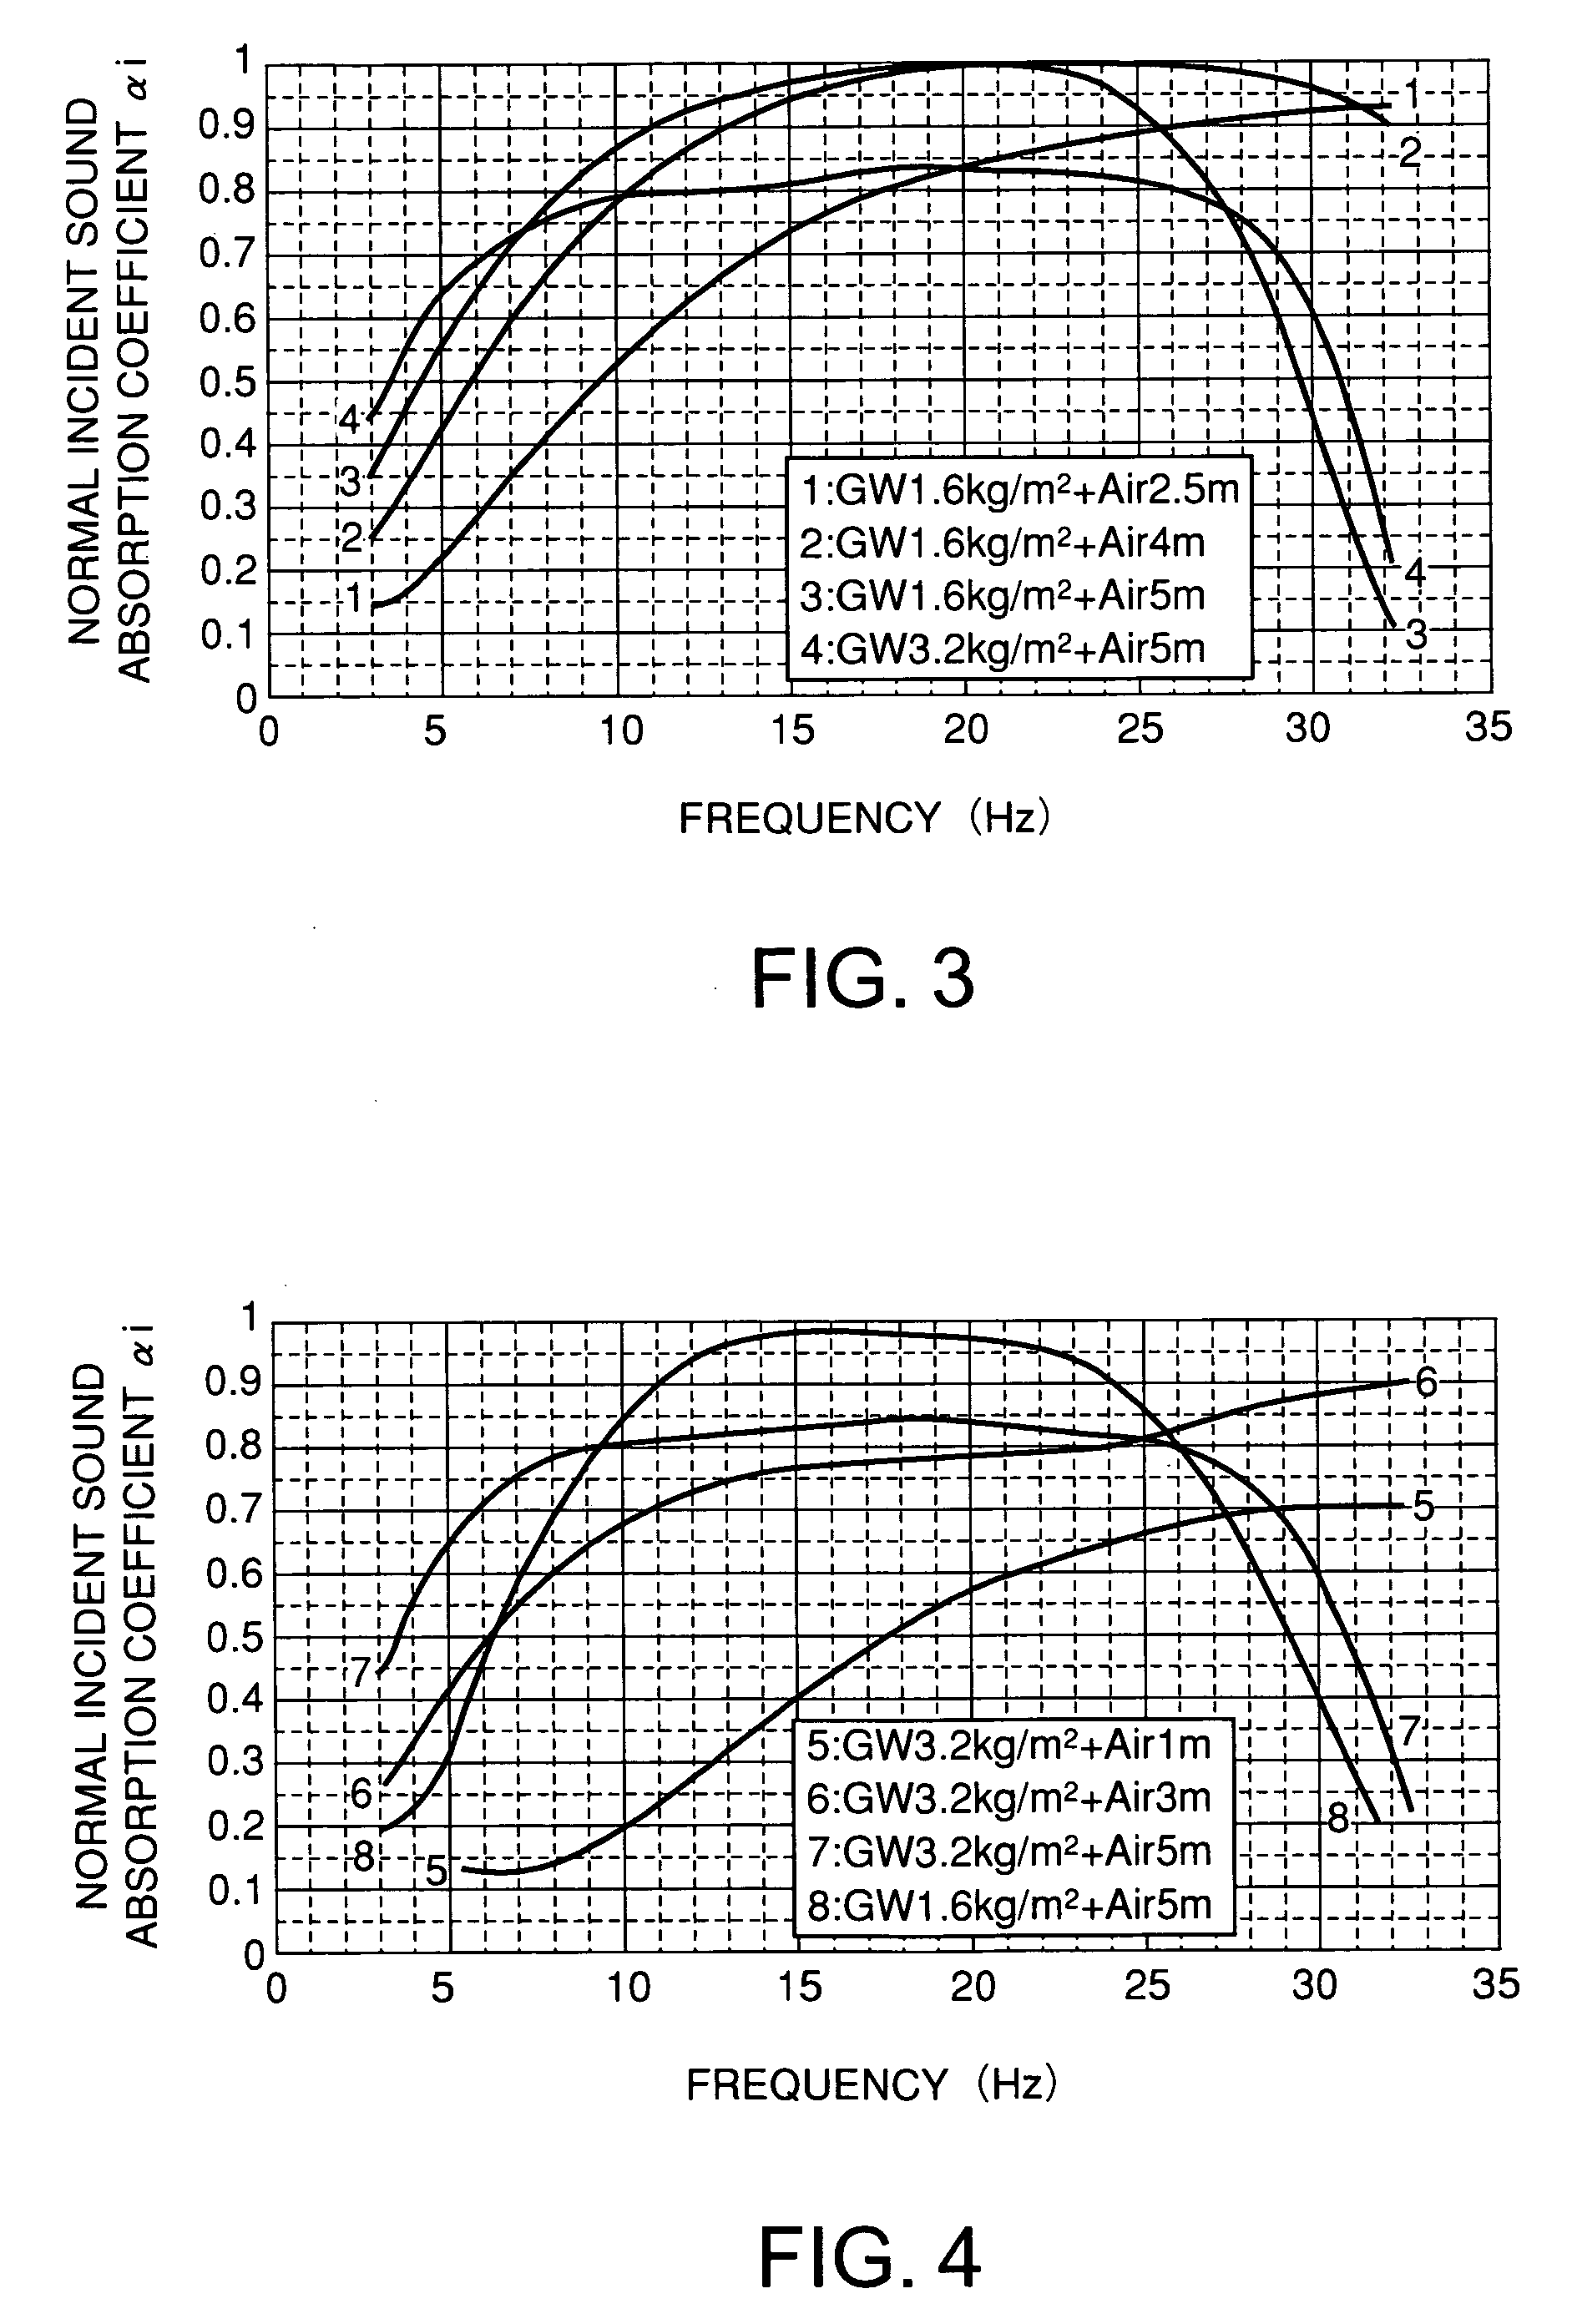 Sound absorbing device for ultra-low frequency sound